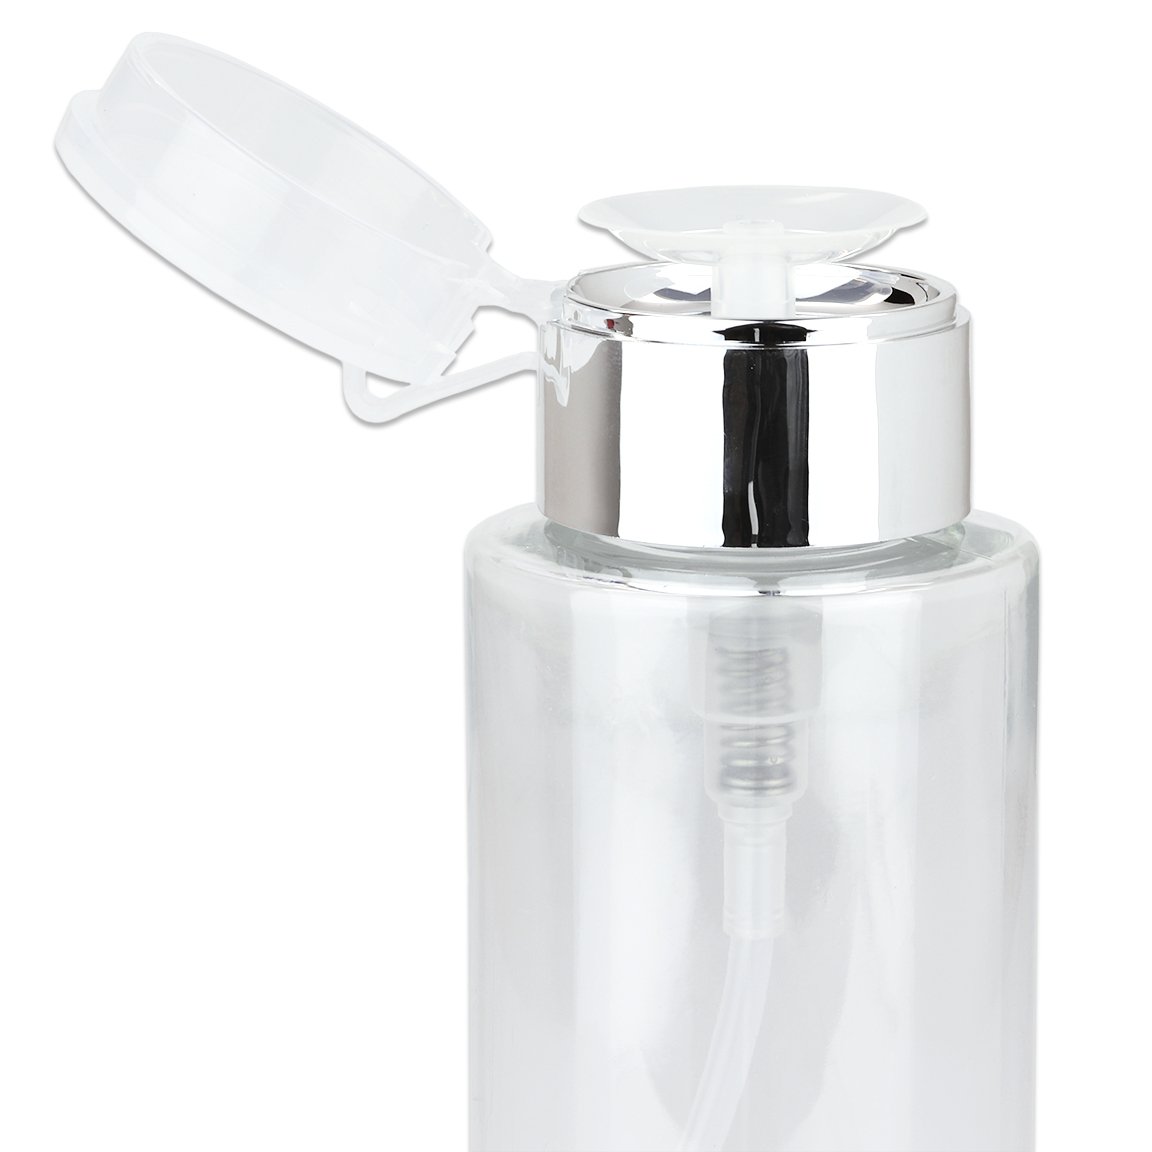 Pana 7oz. Professional Push Down Liquid Pumping Clear Bottle Dispenser (Silver Lid with No Wording, 2pc)